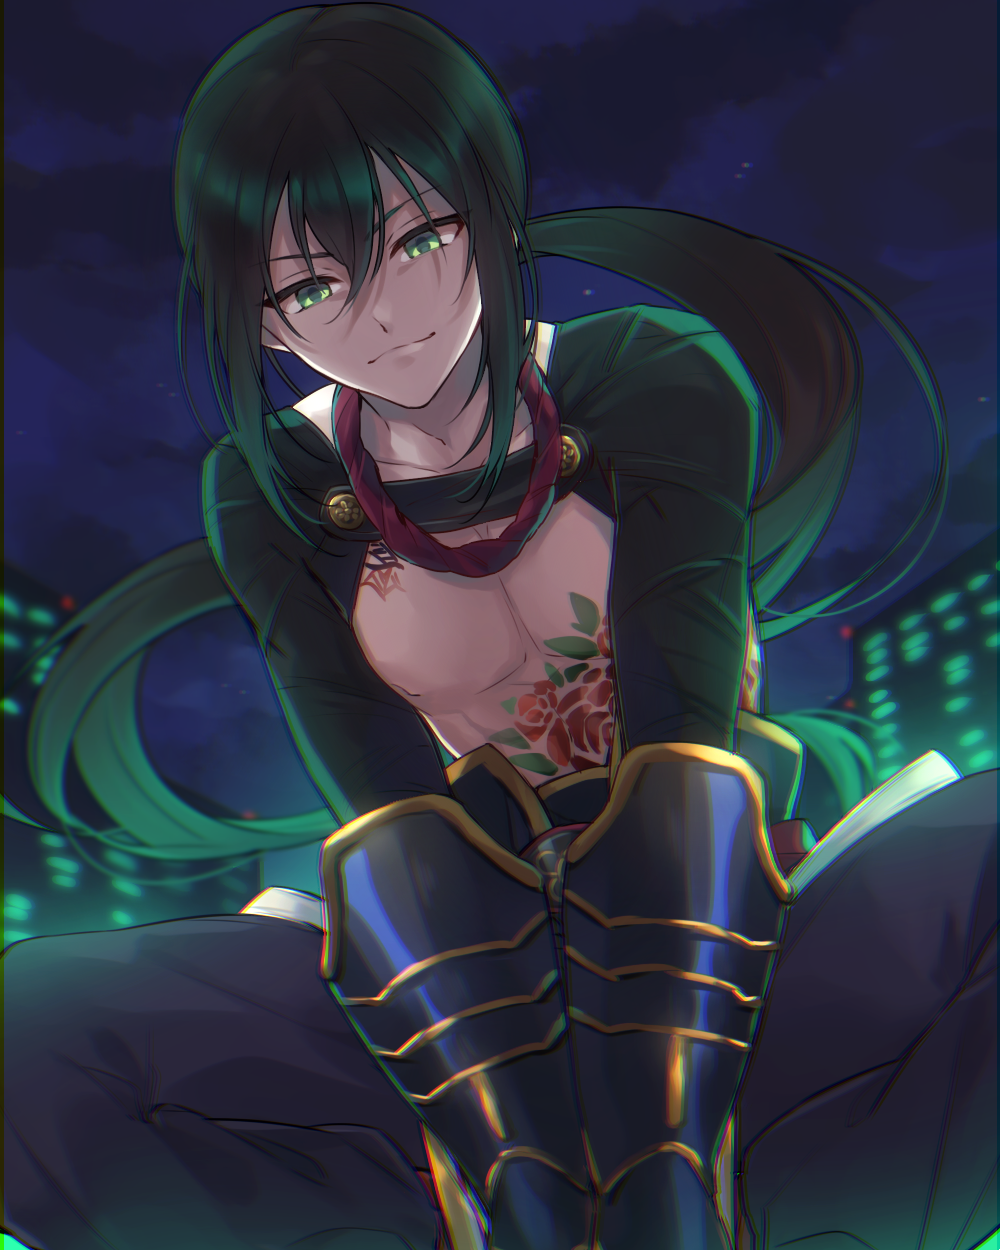 1boy black_hair chest citron_82 city fate/grand_order fate_(series) green_eyes highres long_hair looking_at_viewer male_focus night ponytail smile yan_qing_(fate/grand_order)